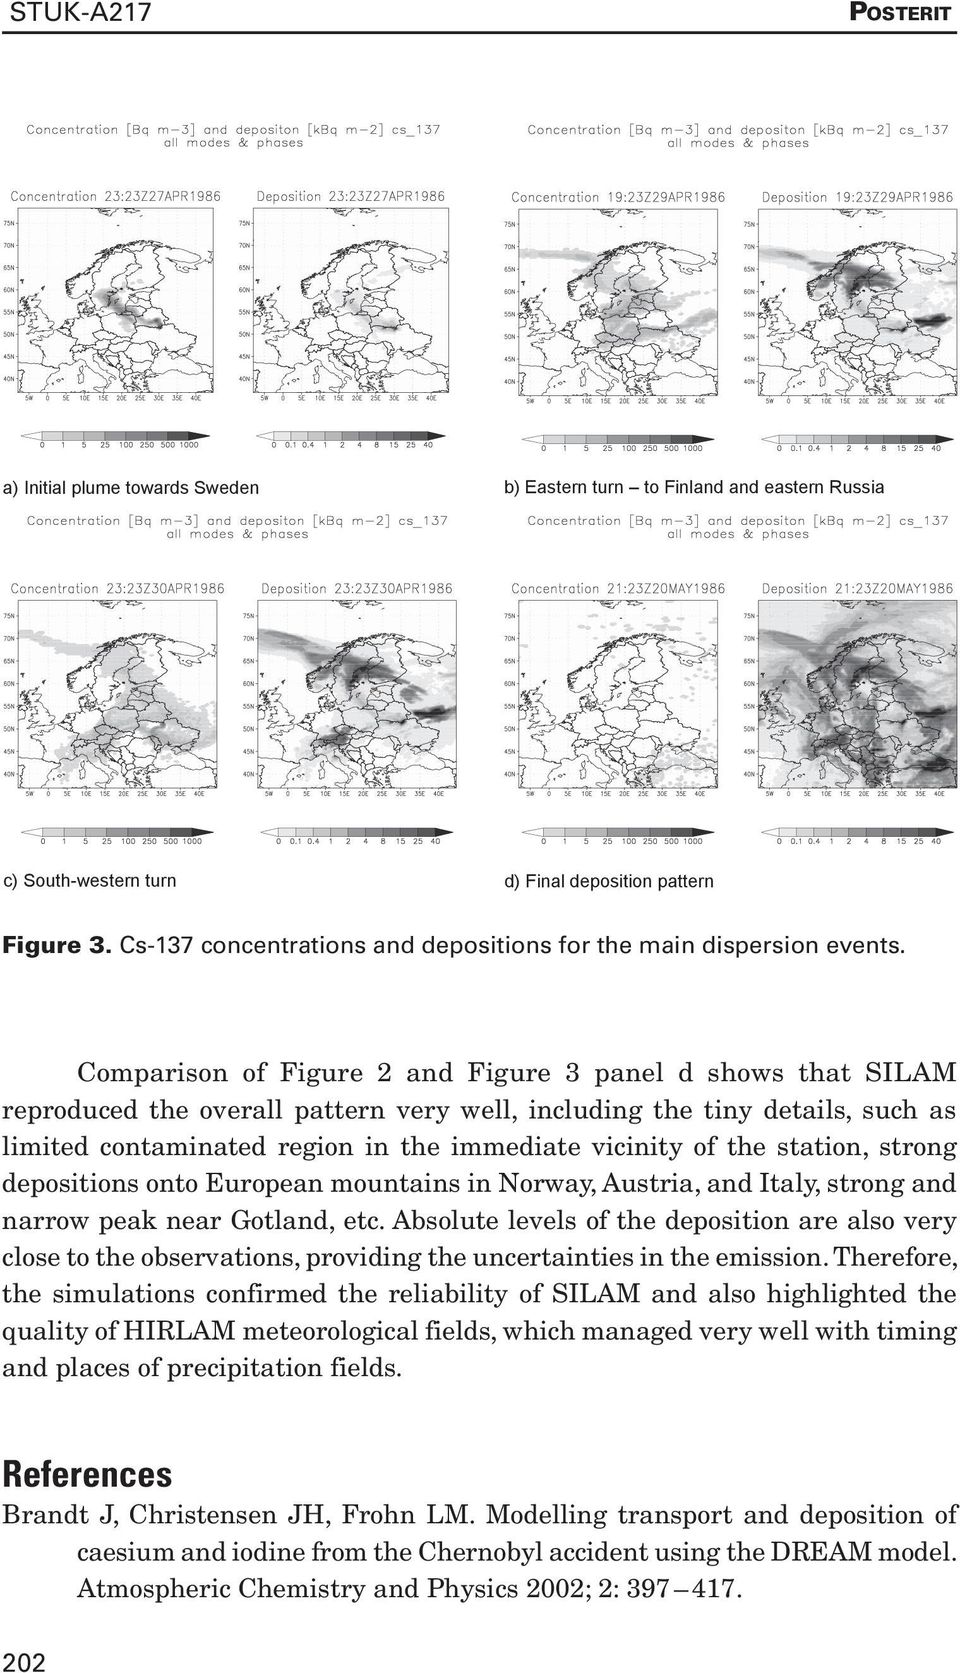 Comparison of Figure 2 and Figure 3 panel d shows that SILAM reproduced the overall pattern very well, including the tiny details, such as limited contaminated region in the immediate vicinity of the